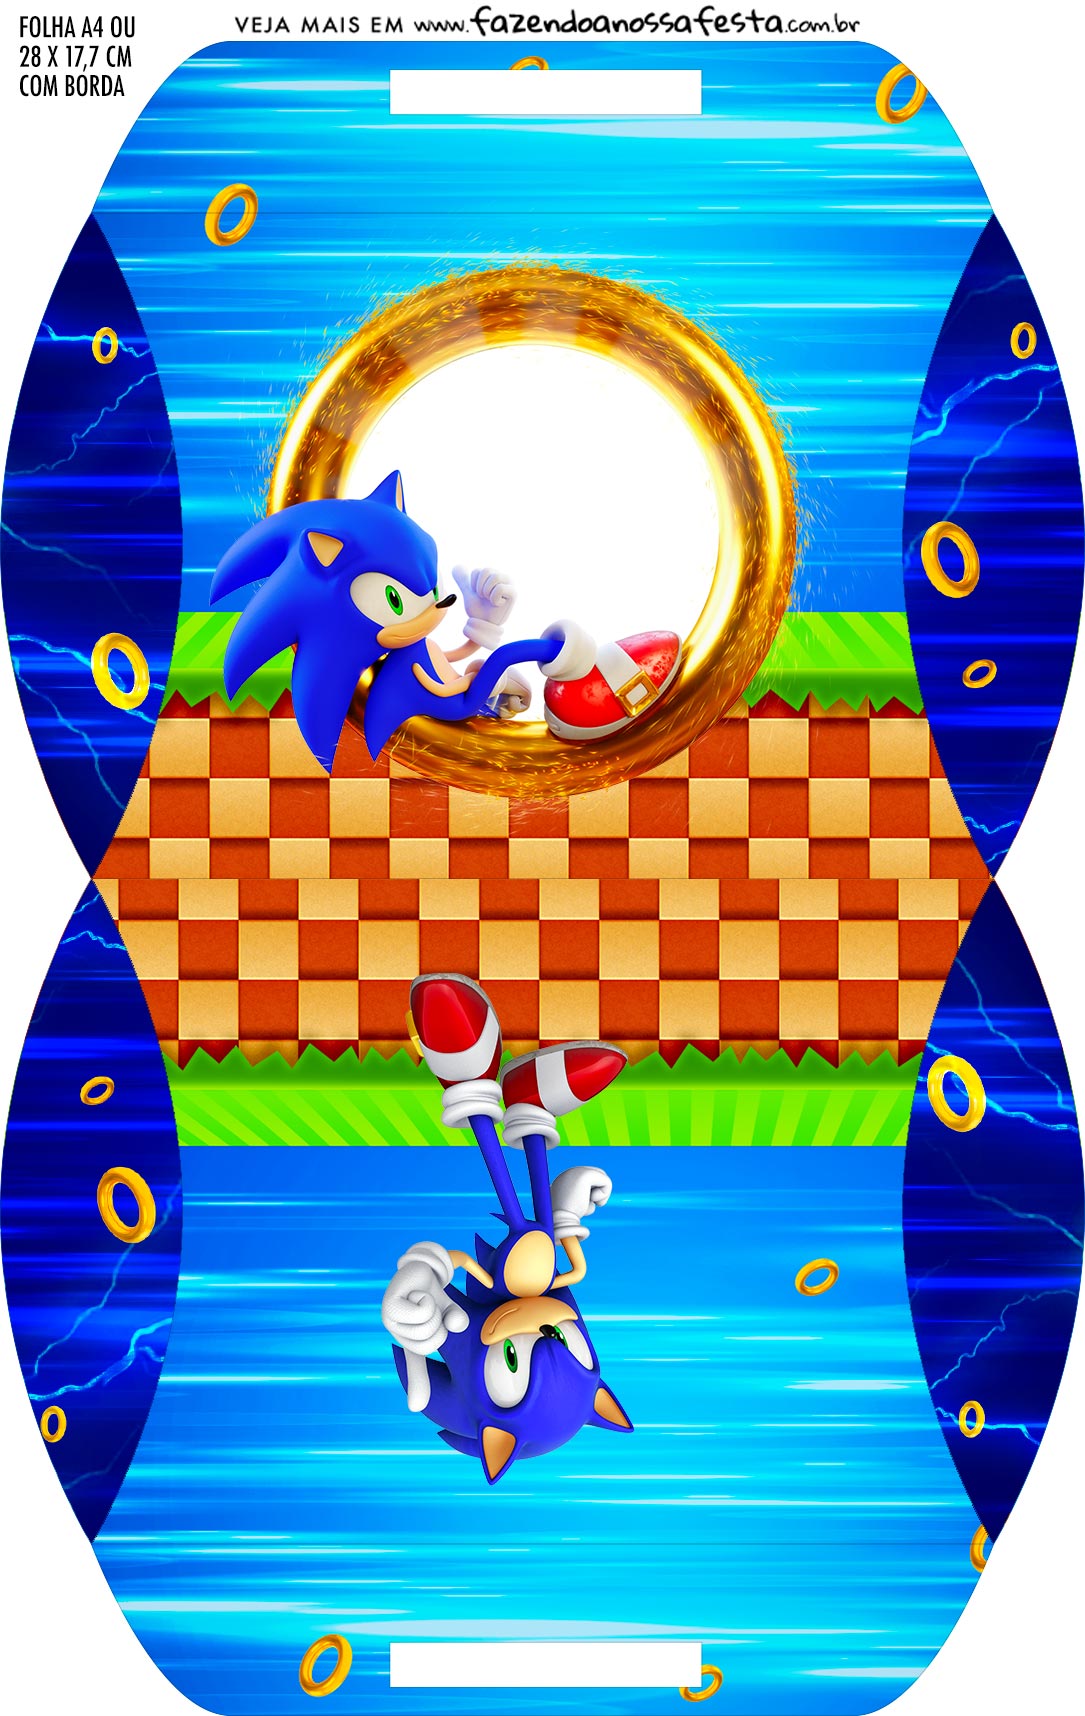 Sonic Party: Free Printable Boxes. - Oh My Fiesta! for Geeks